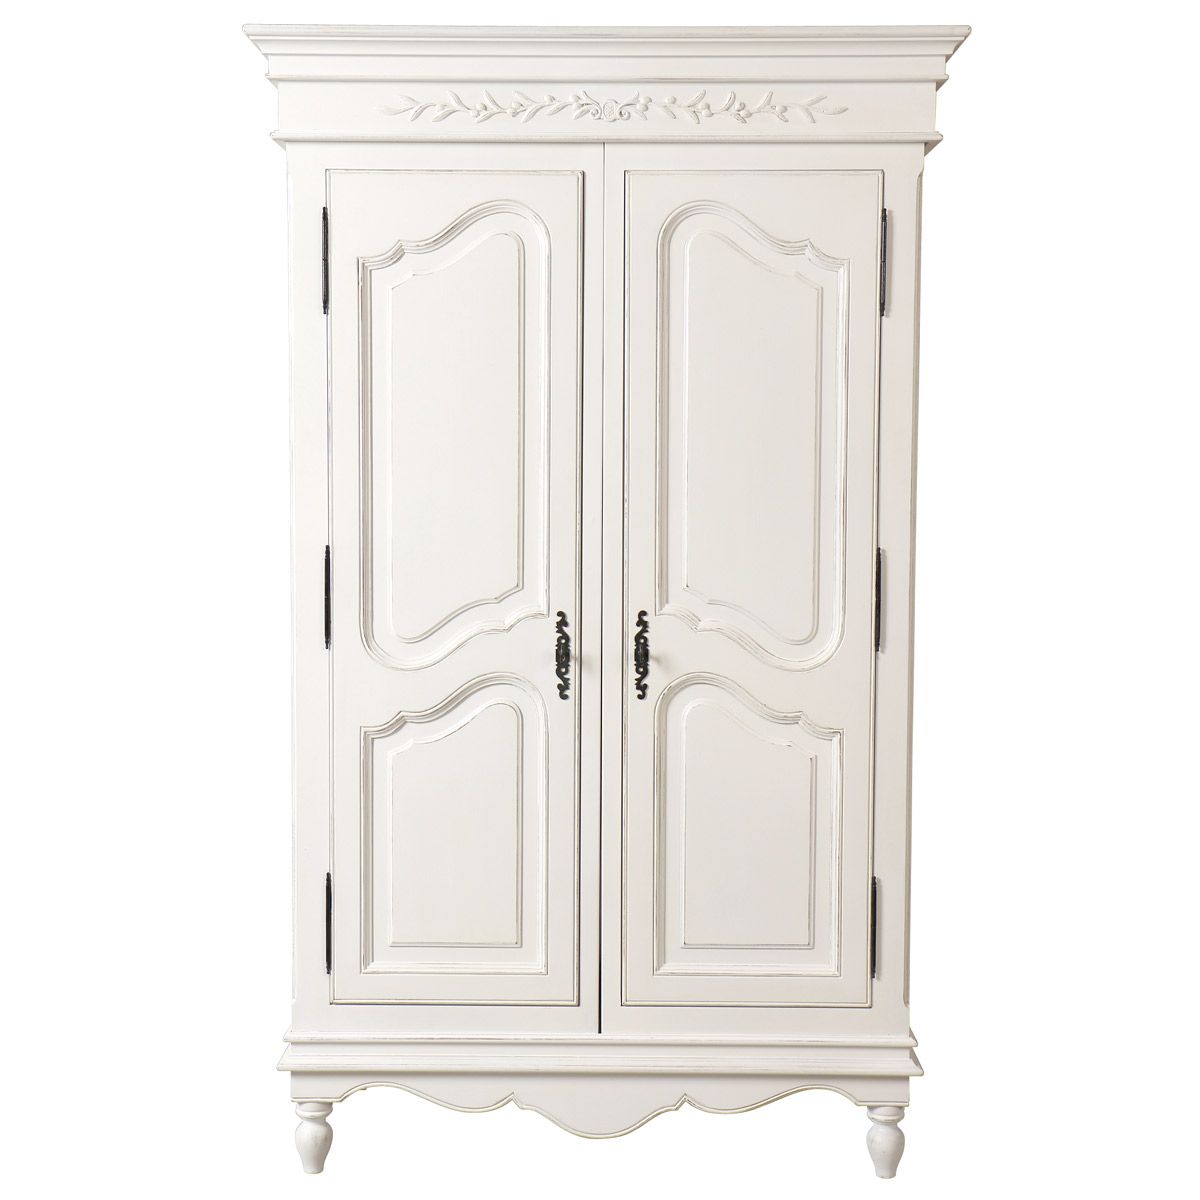 French Armoire Wardrobe – Romance – Low Cost Delivery, Nationwide With French Armoire Wardrobes (View 3 of 20)